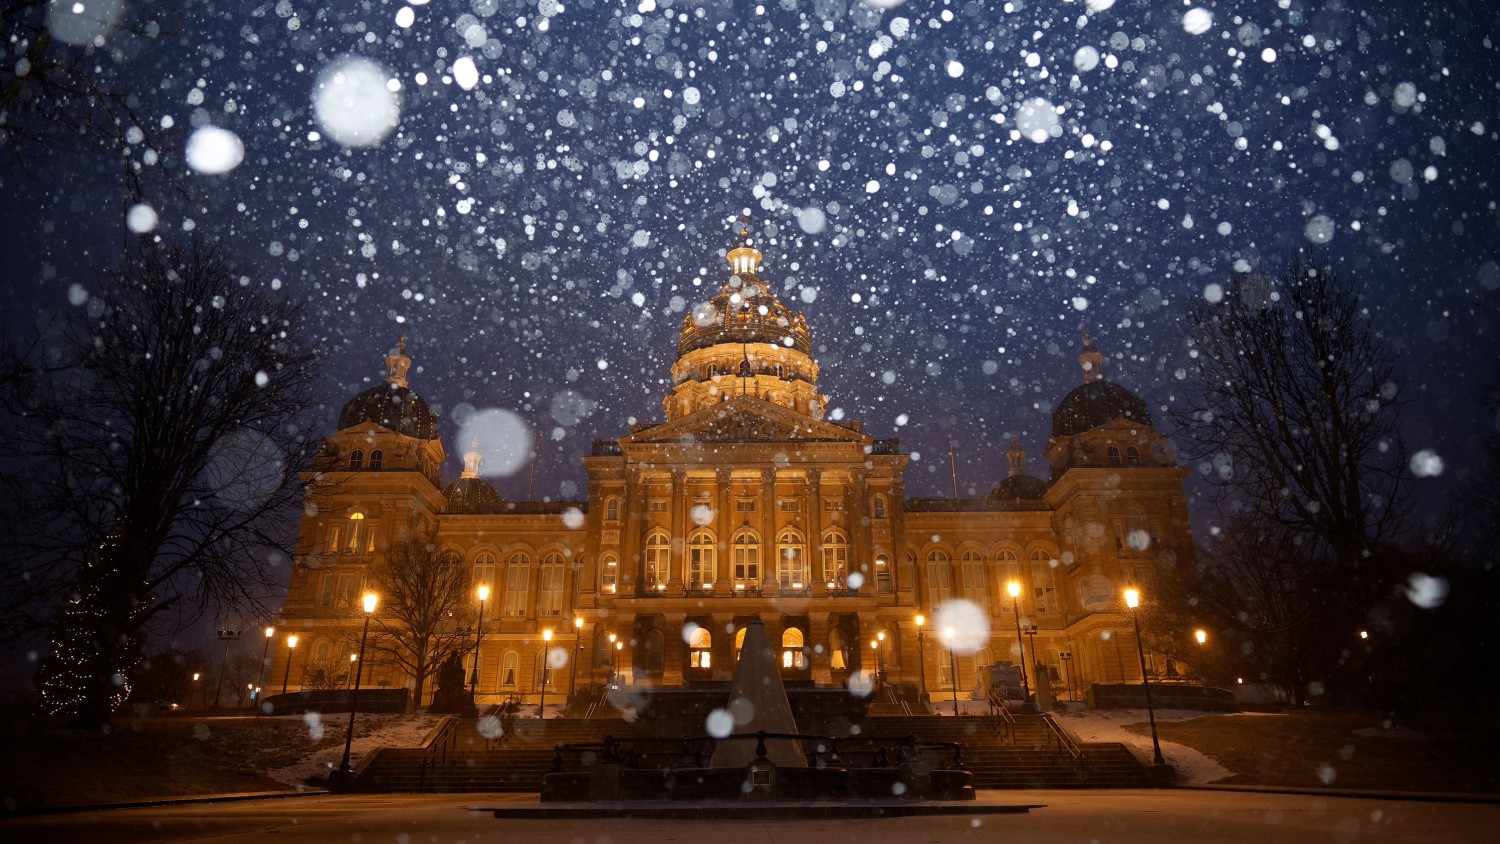 Snow falls on the Iowa State Capitol in Des Moines amid a powerful winter storm on Monday. Chip Somodevilla/Getty Images